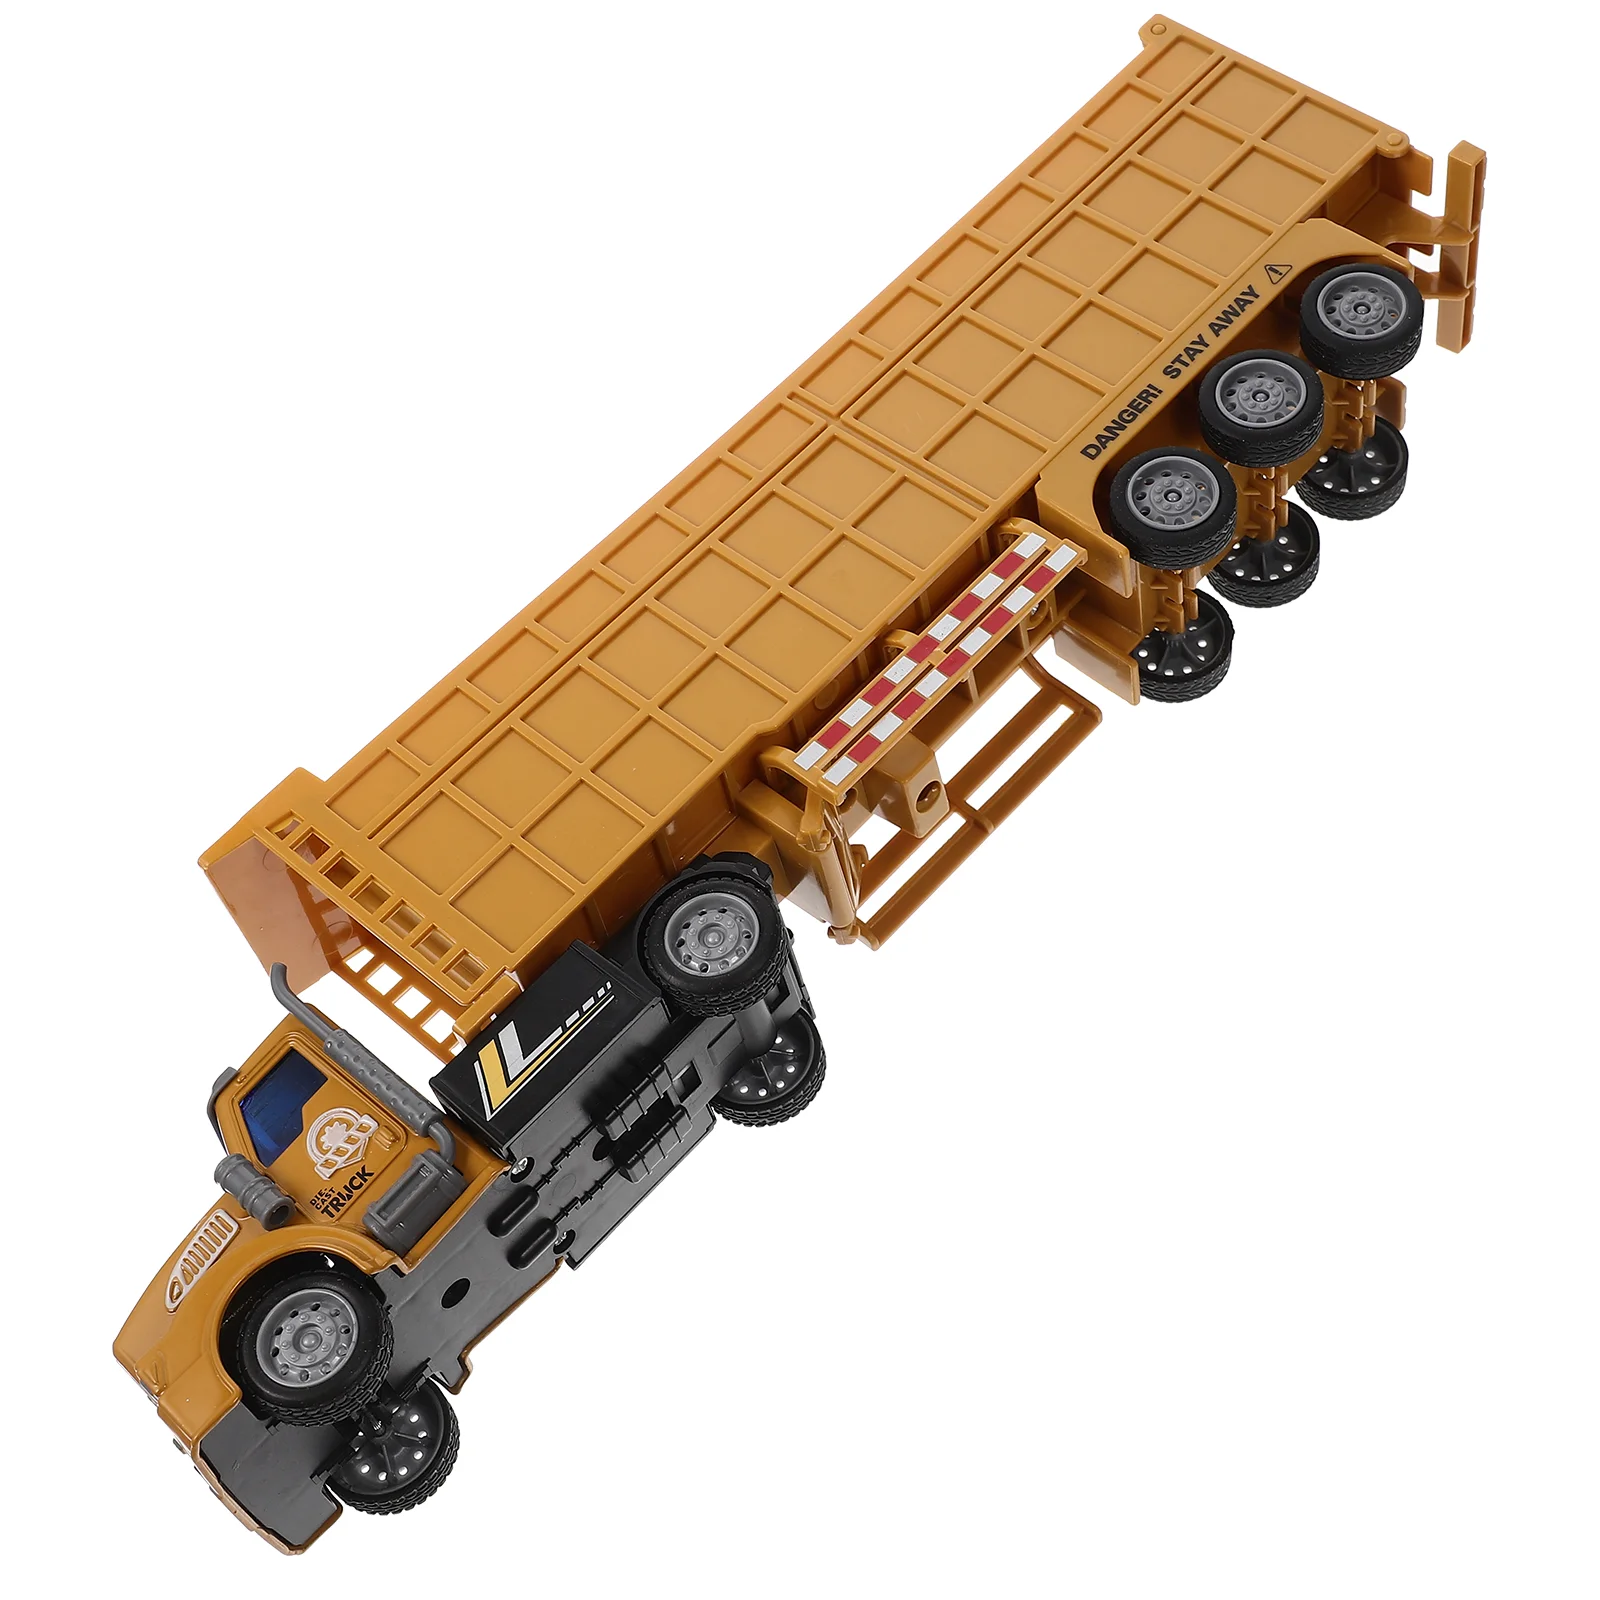 Boys Truck Toy Trucks For Kids For Kids Car Carrier Toy Car Hauler Large Toy Truck Mini Container Toys Kids Mini Toyss enlarge